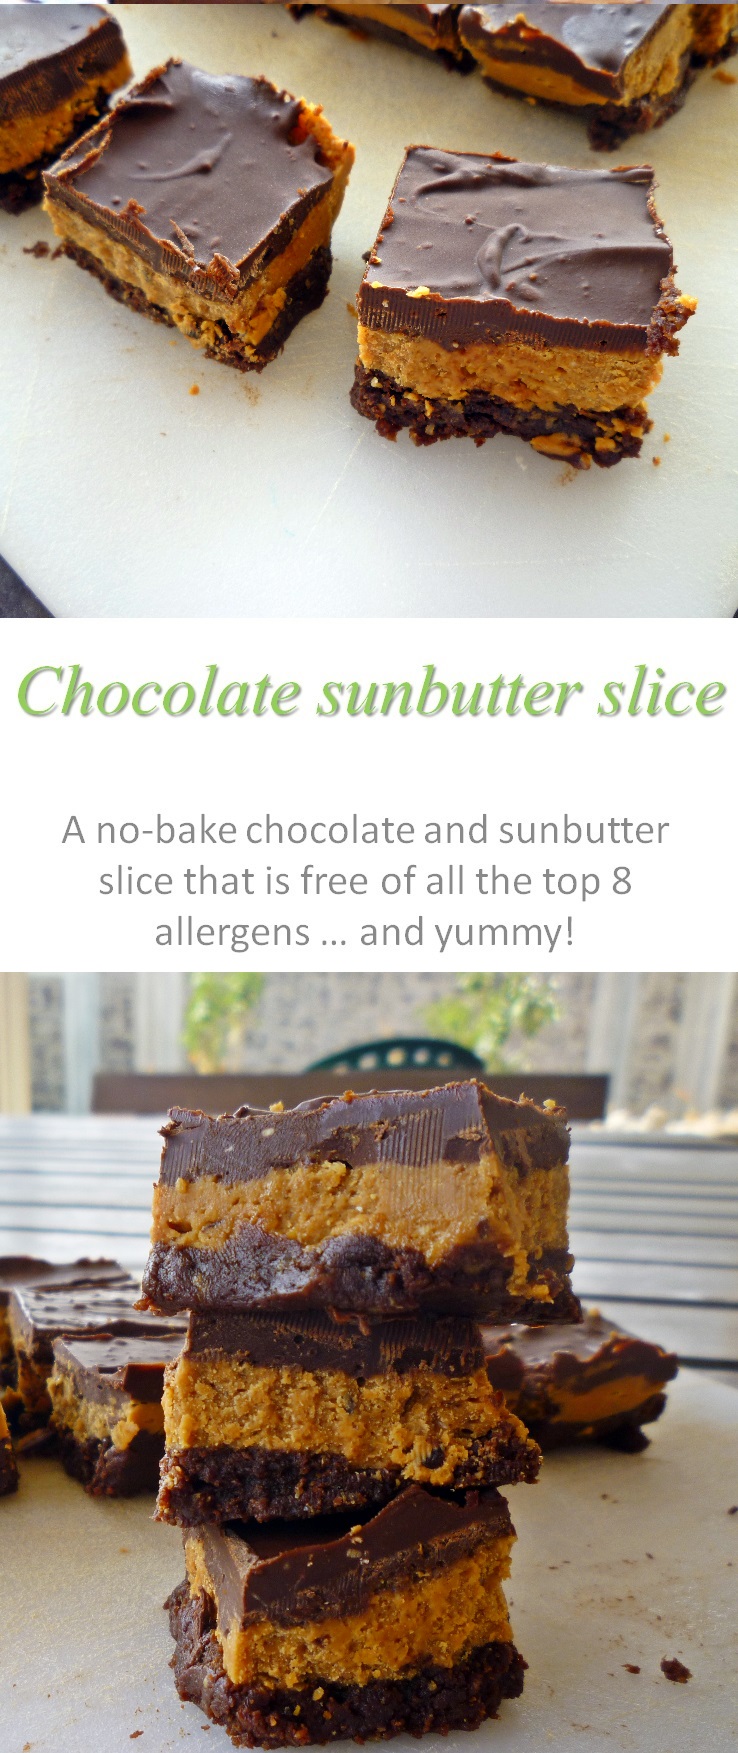 A no-bake chocolate sunbutter slice, free of all the top 8 allergens, perfect for any occasion and so yummy! #sunbutter